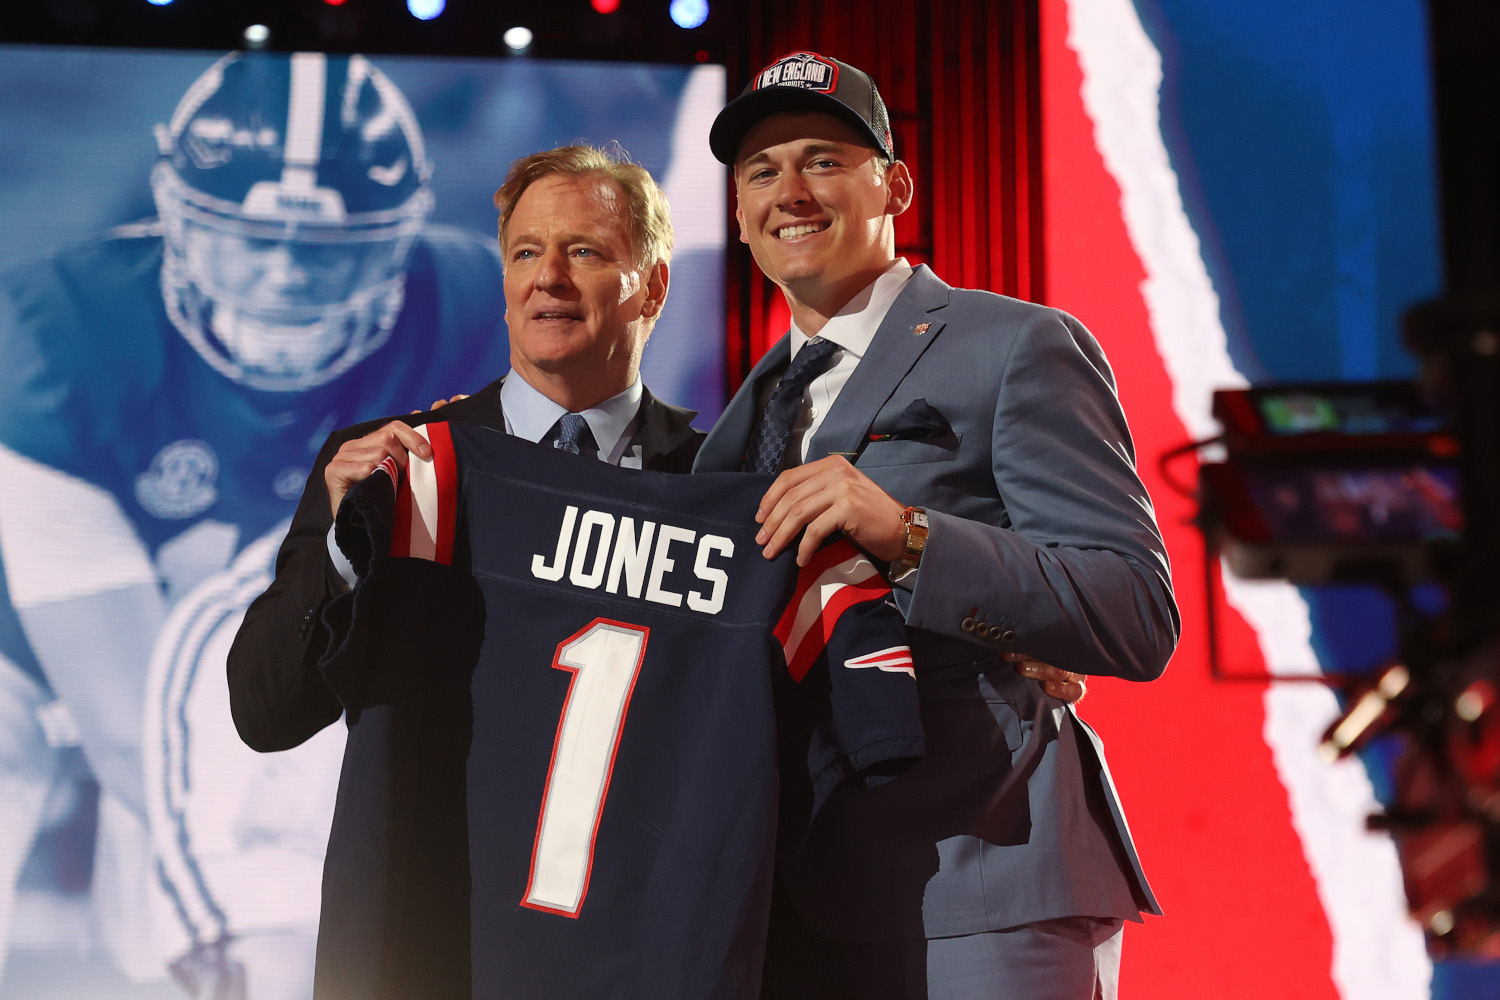 New England Patriots draft pick Mac Jones, selected in the first round by Bill Belichick